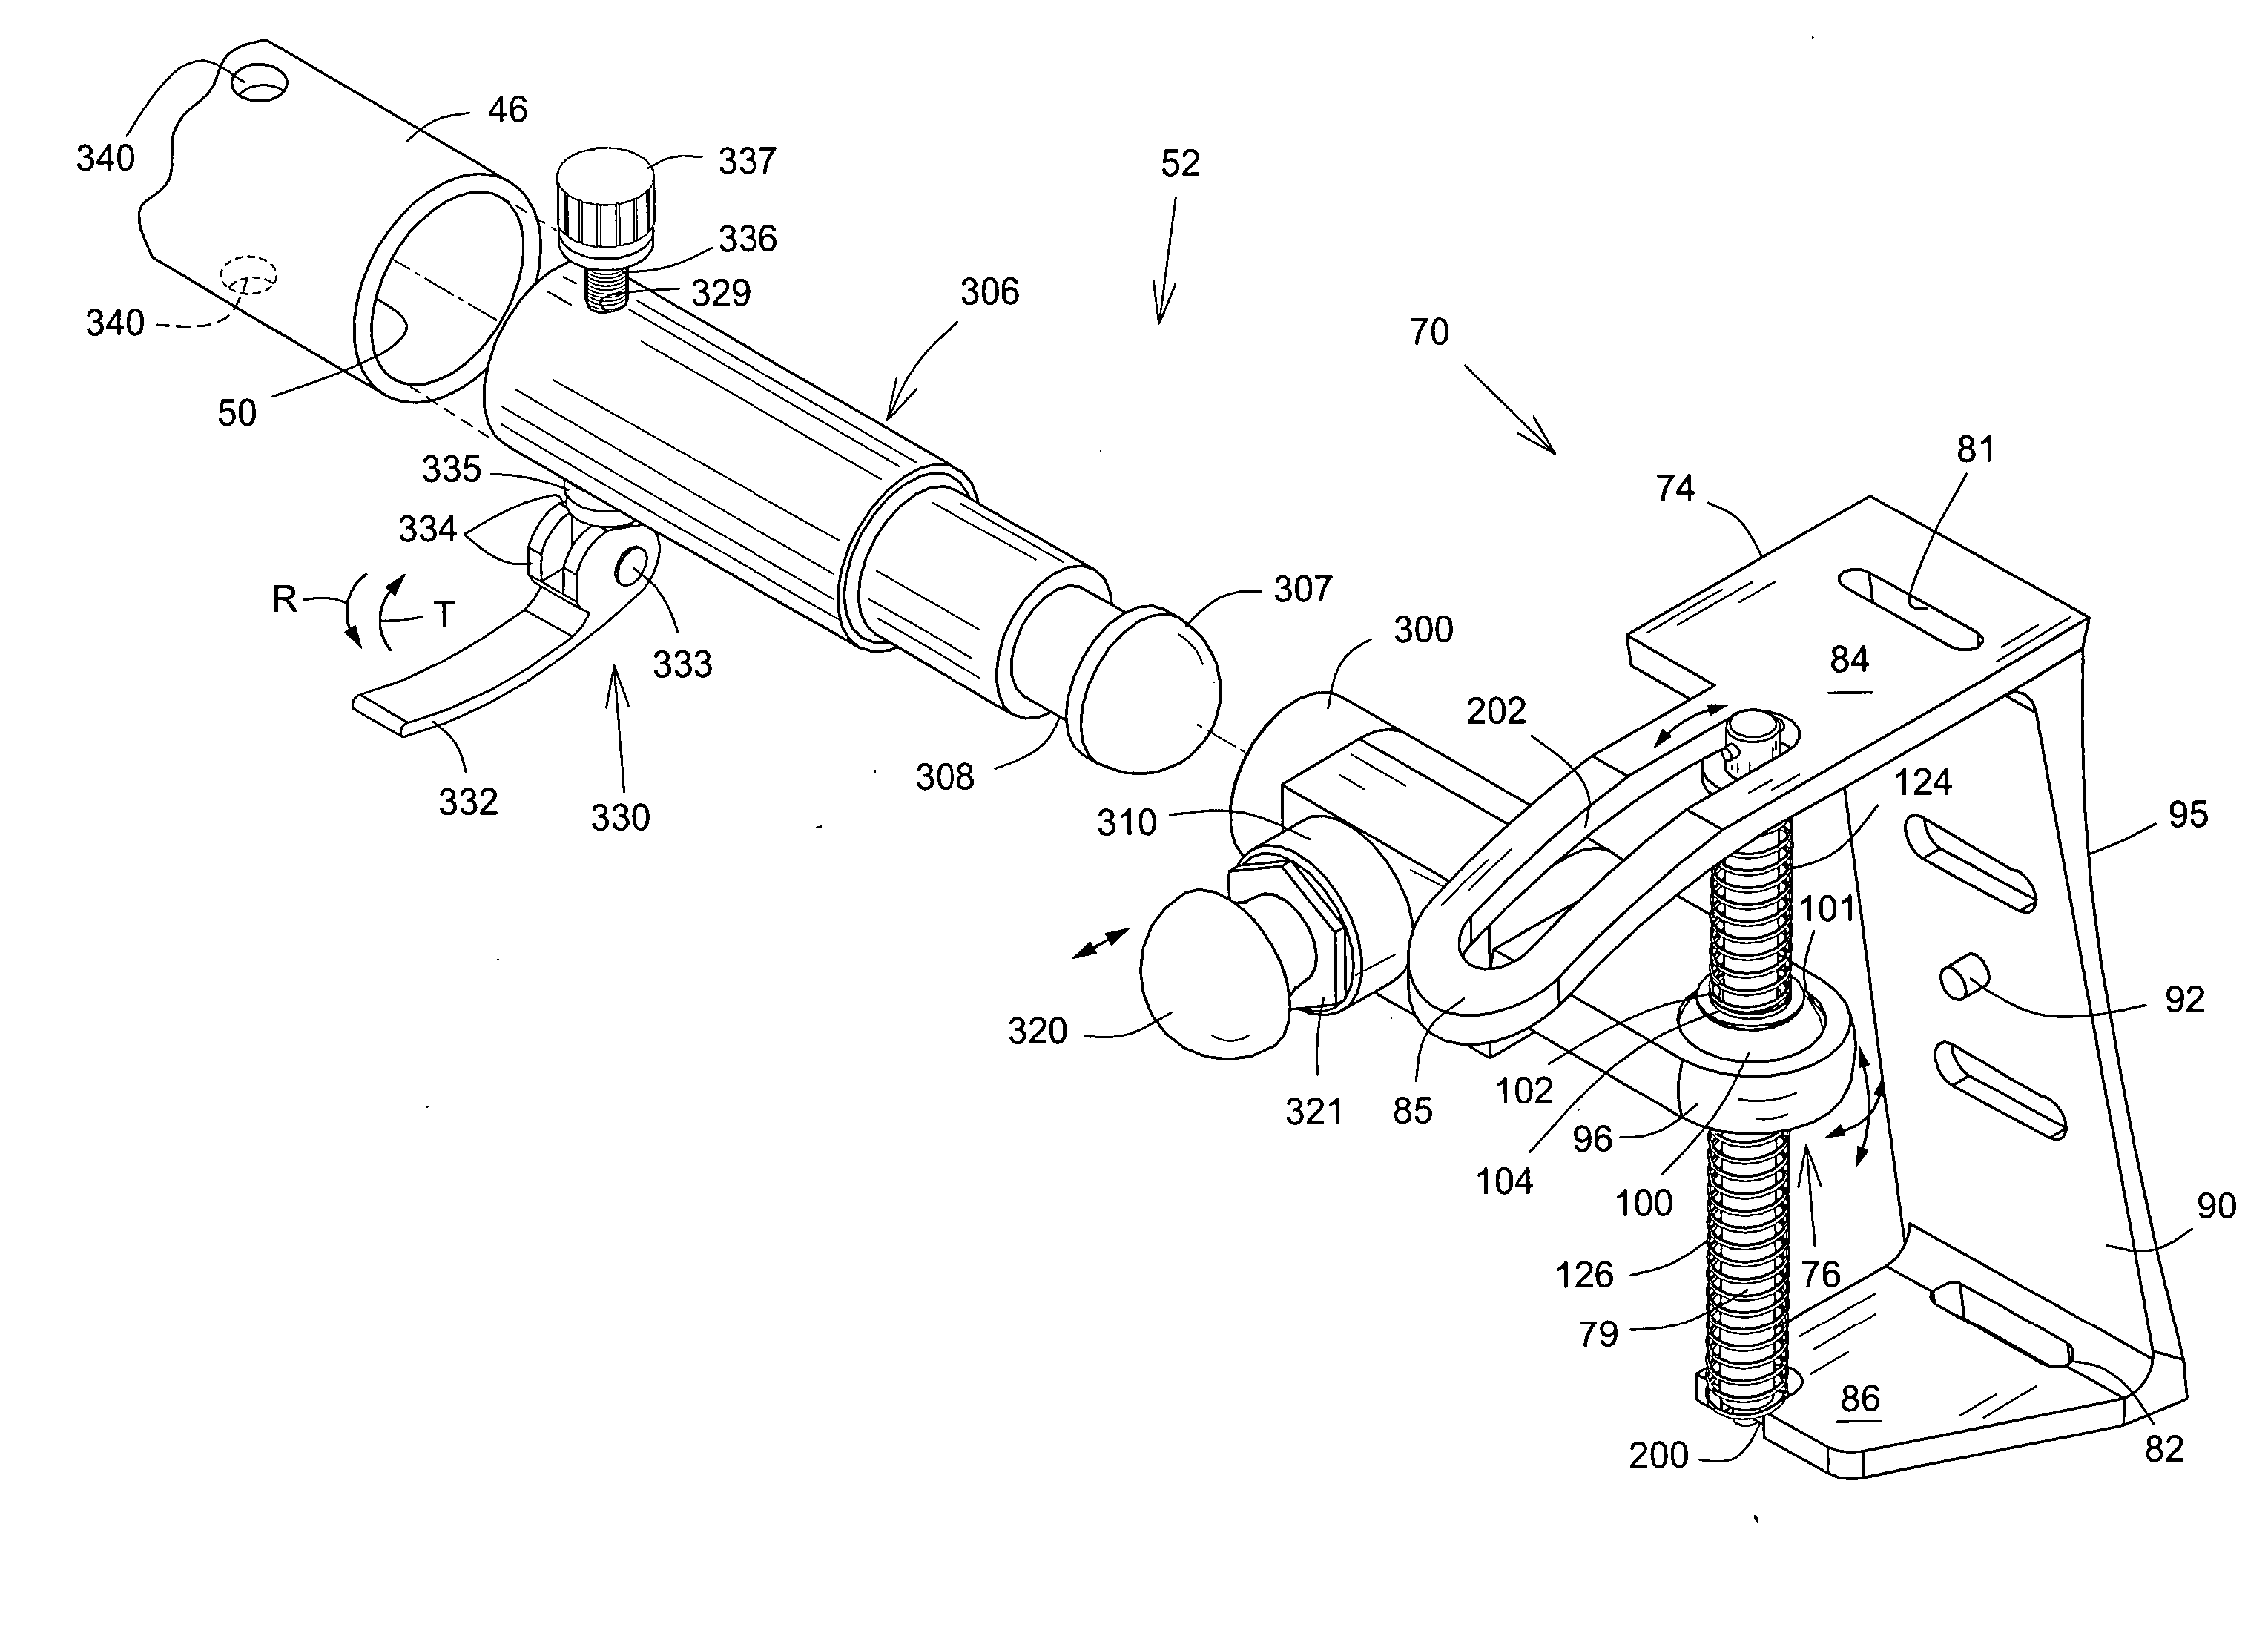 Sulky shaft connector device